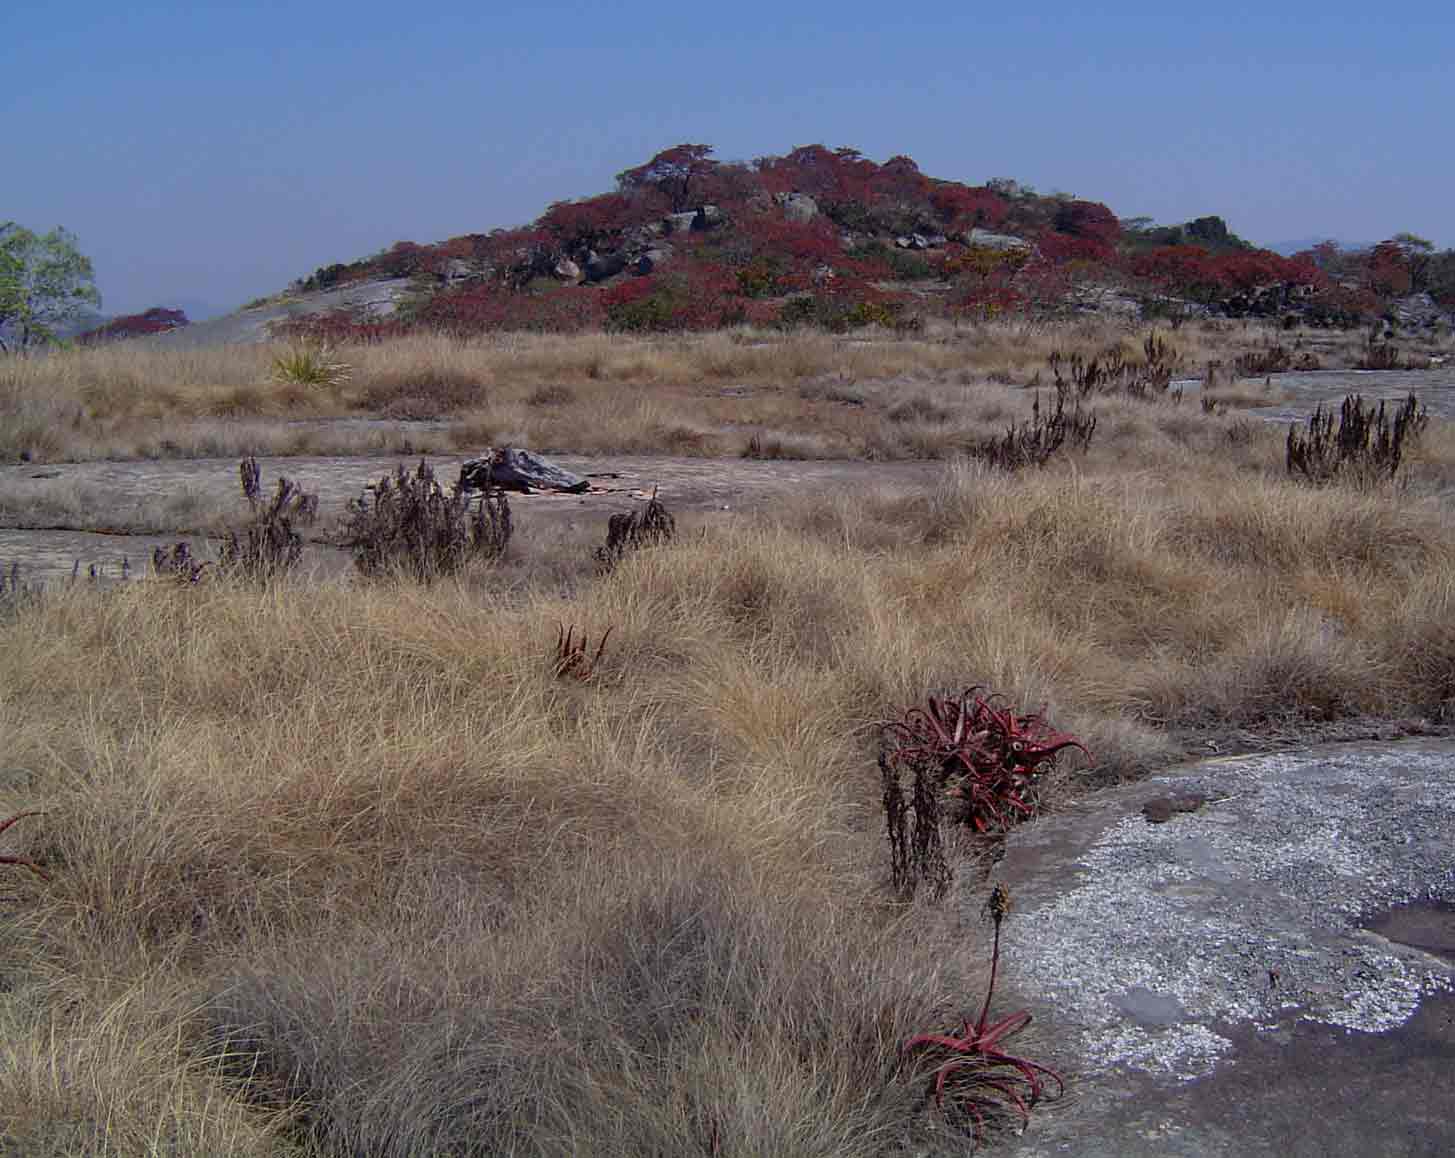 <a href="species.php?species_id=113790">Aloe cameronii</a> and <a href="species.php?species_id=125310">Myrothamnus flabellifolius</a> in vegetation islands